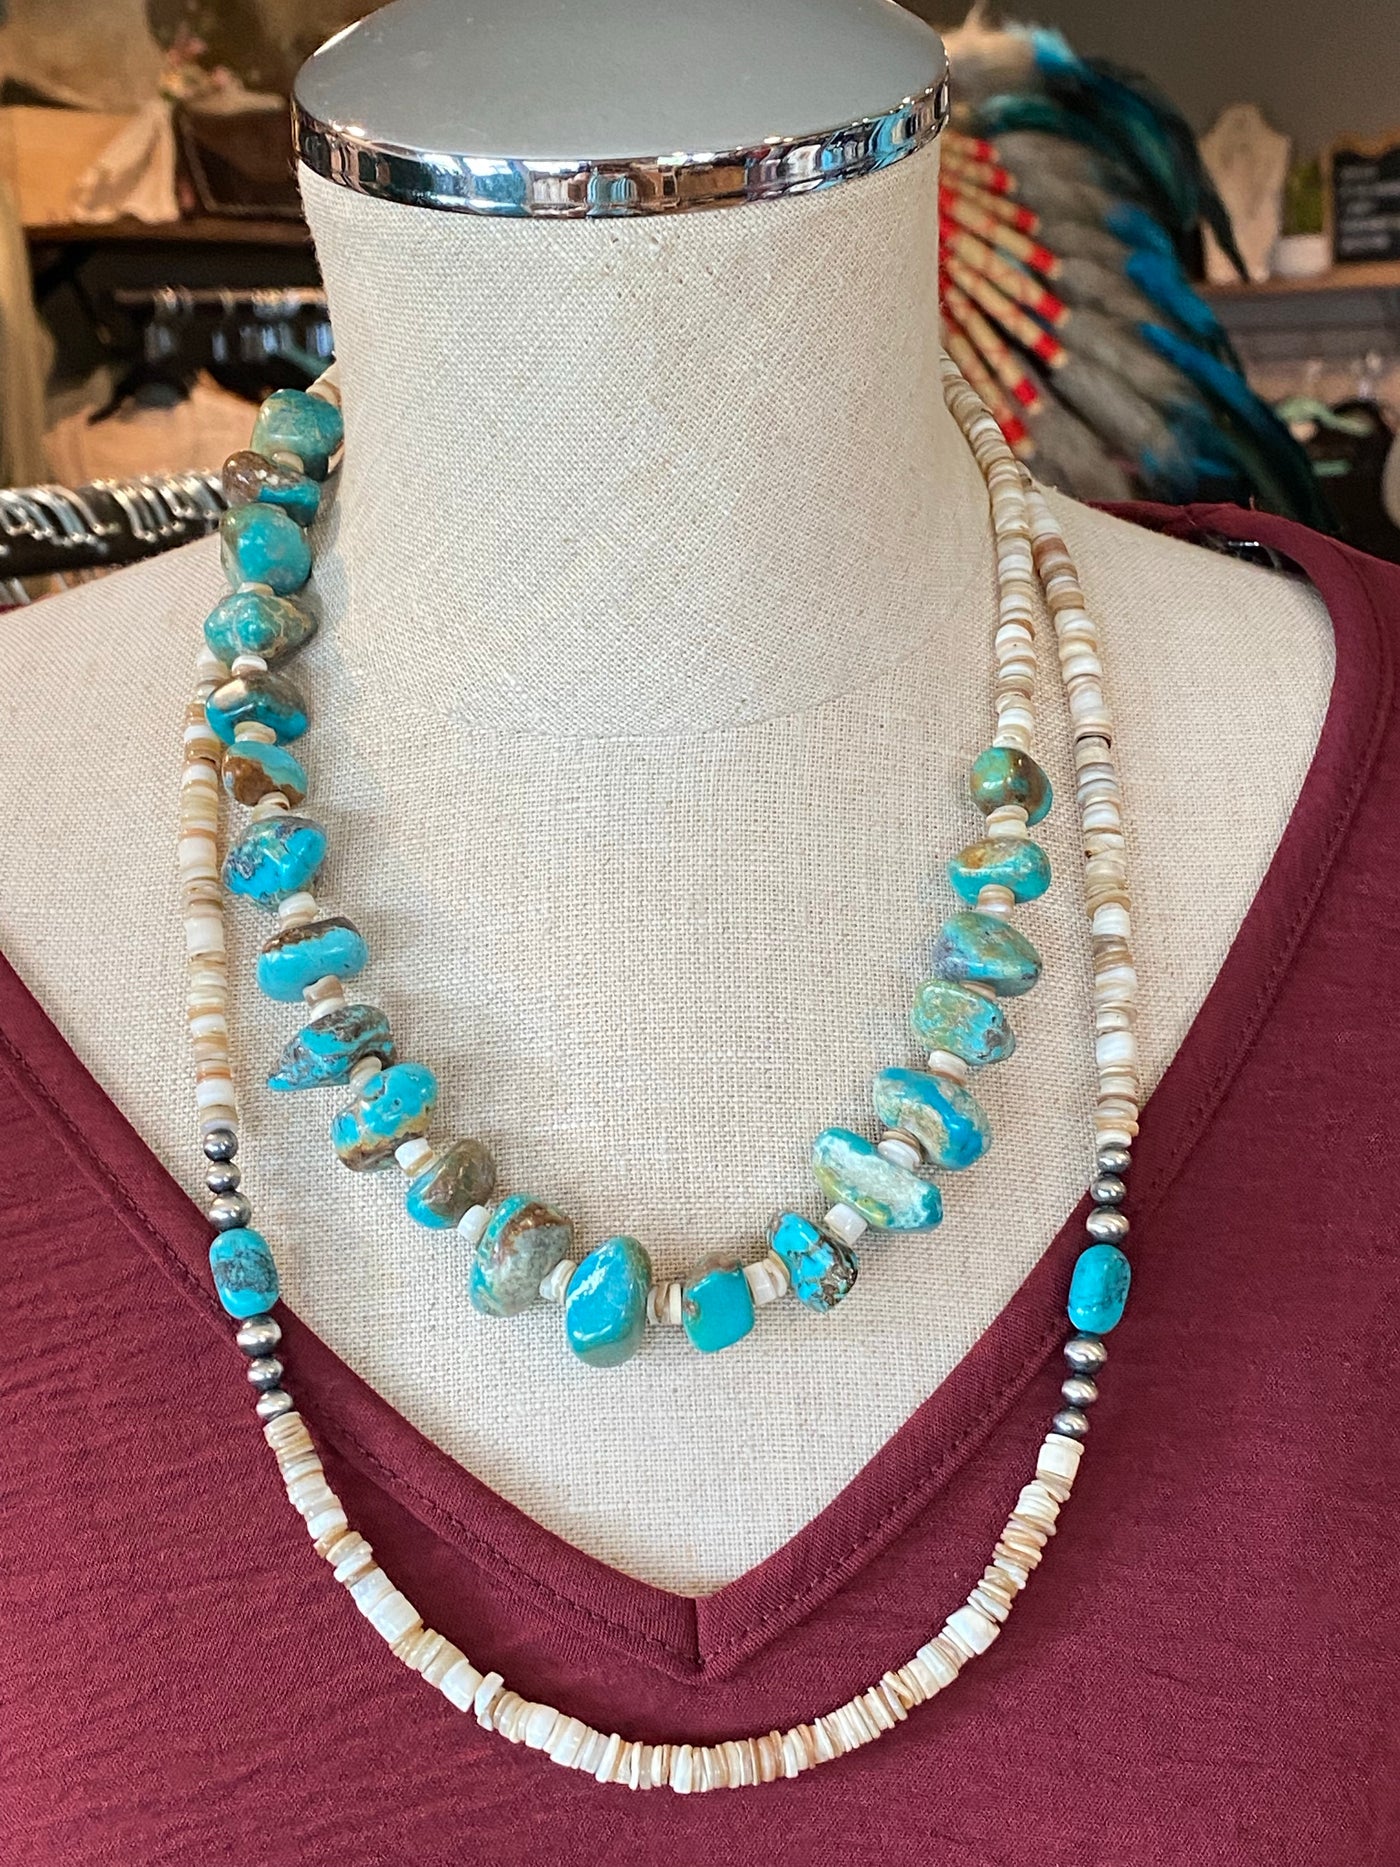 The Taos Necklace